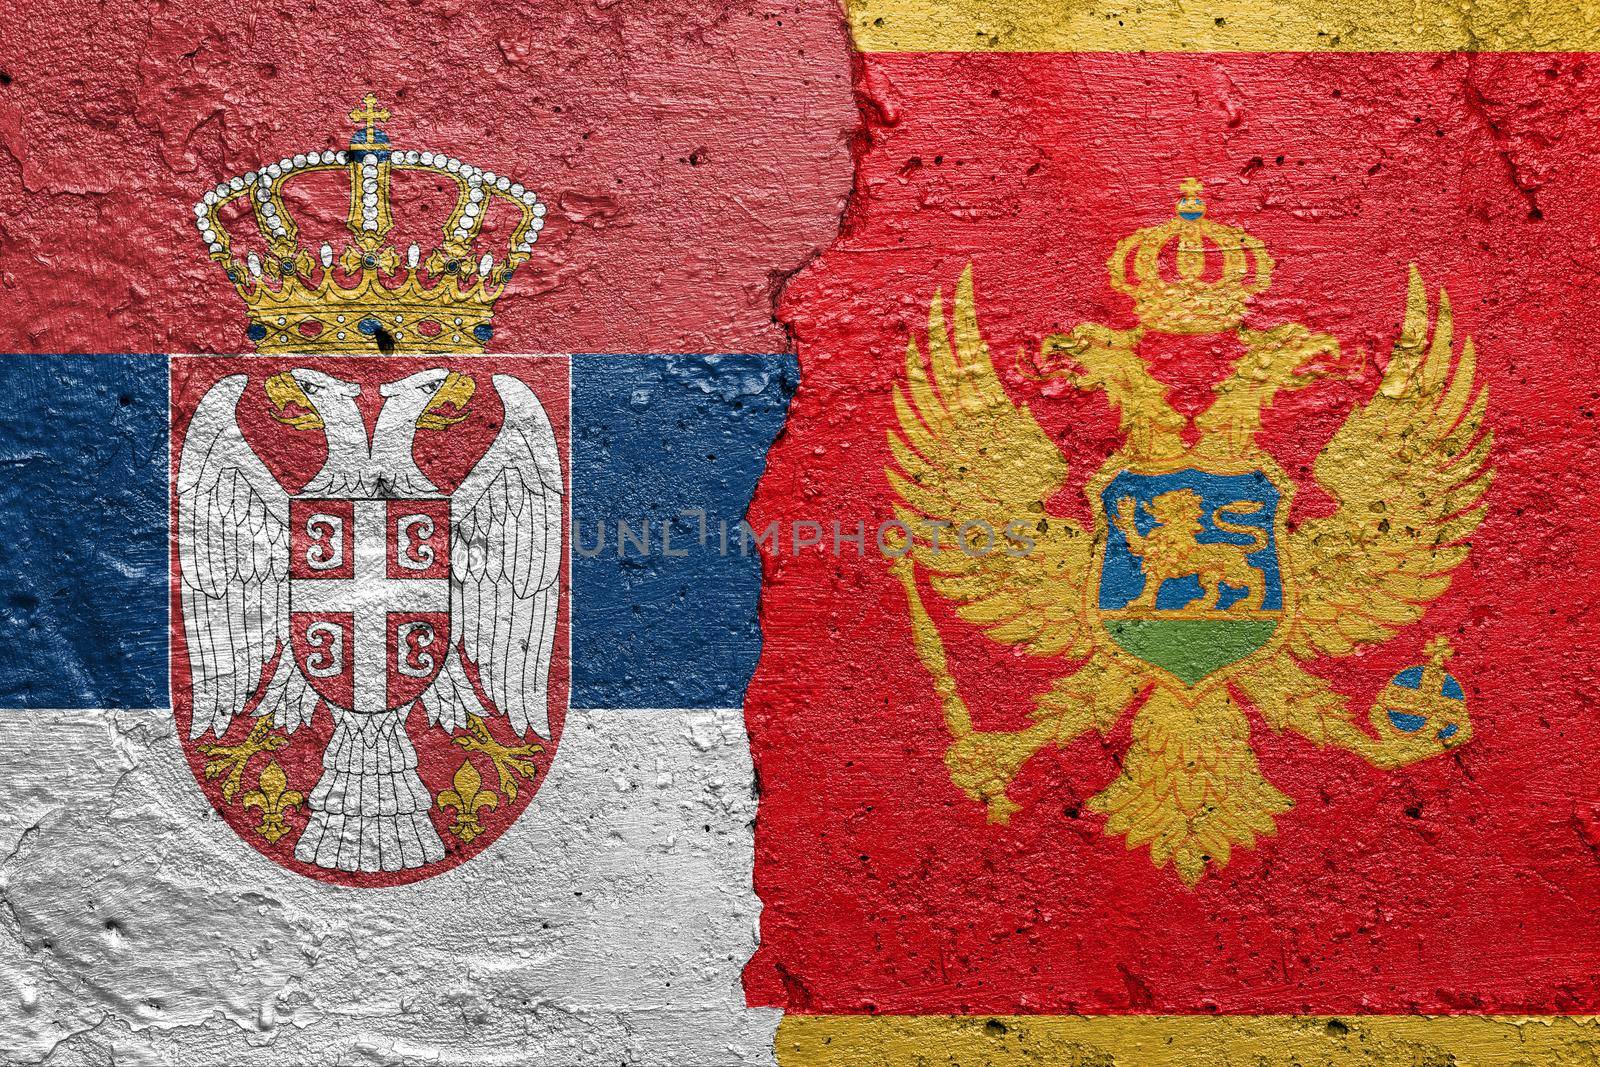 Serbia and Montenegro - Cracked concrete wall painted with a Serbian flag on the left and a Montenegrin flag on the right stock photo by adamr